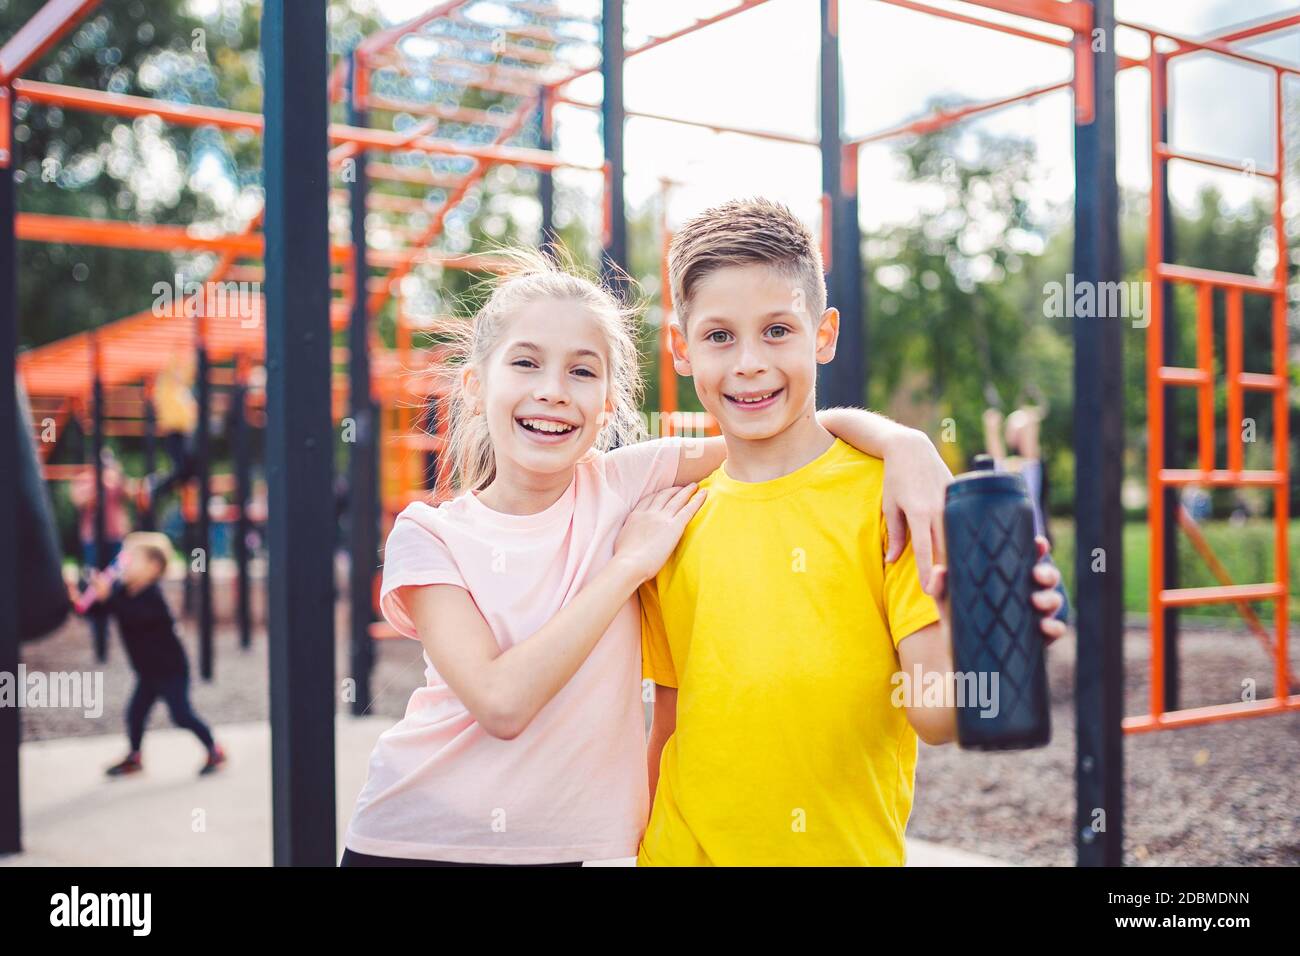 Teens children and sports theme. Two kids athletes twins rest and replenish their thirst during workout outdoor gym workout in sunny summer weather. S Stock Photo